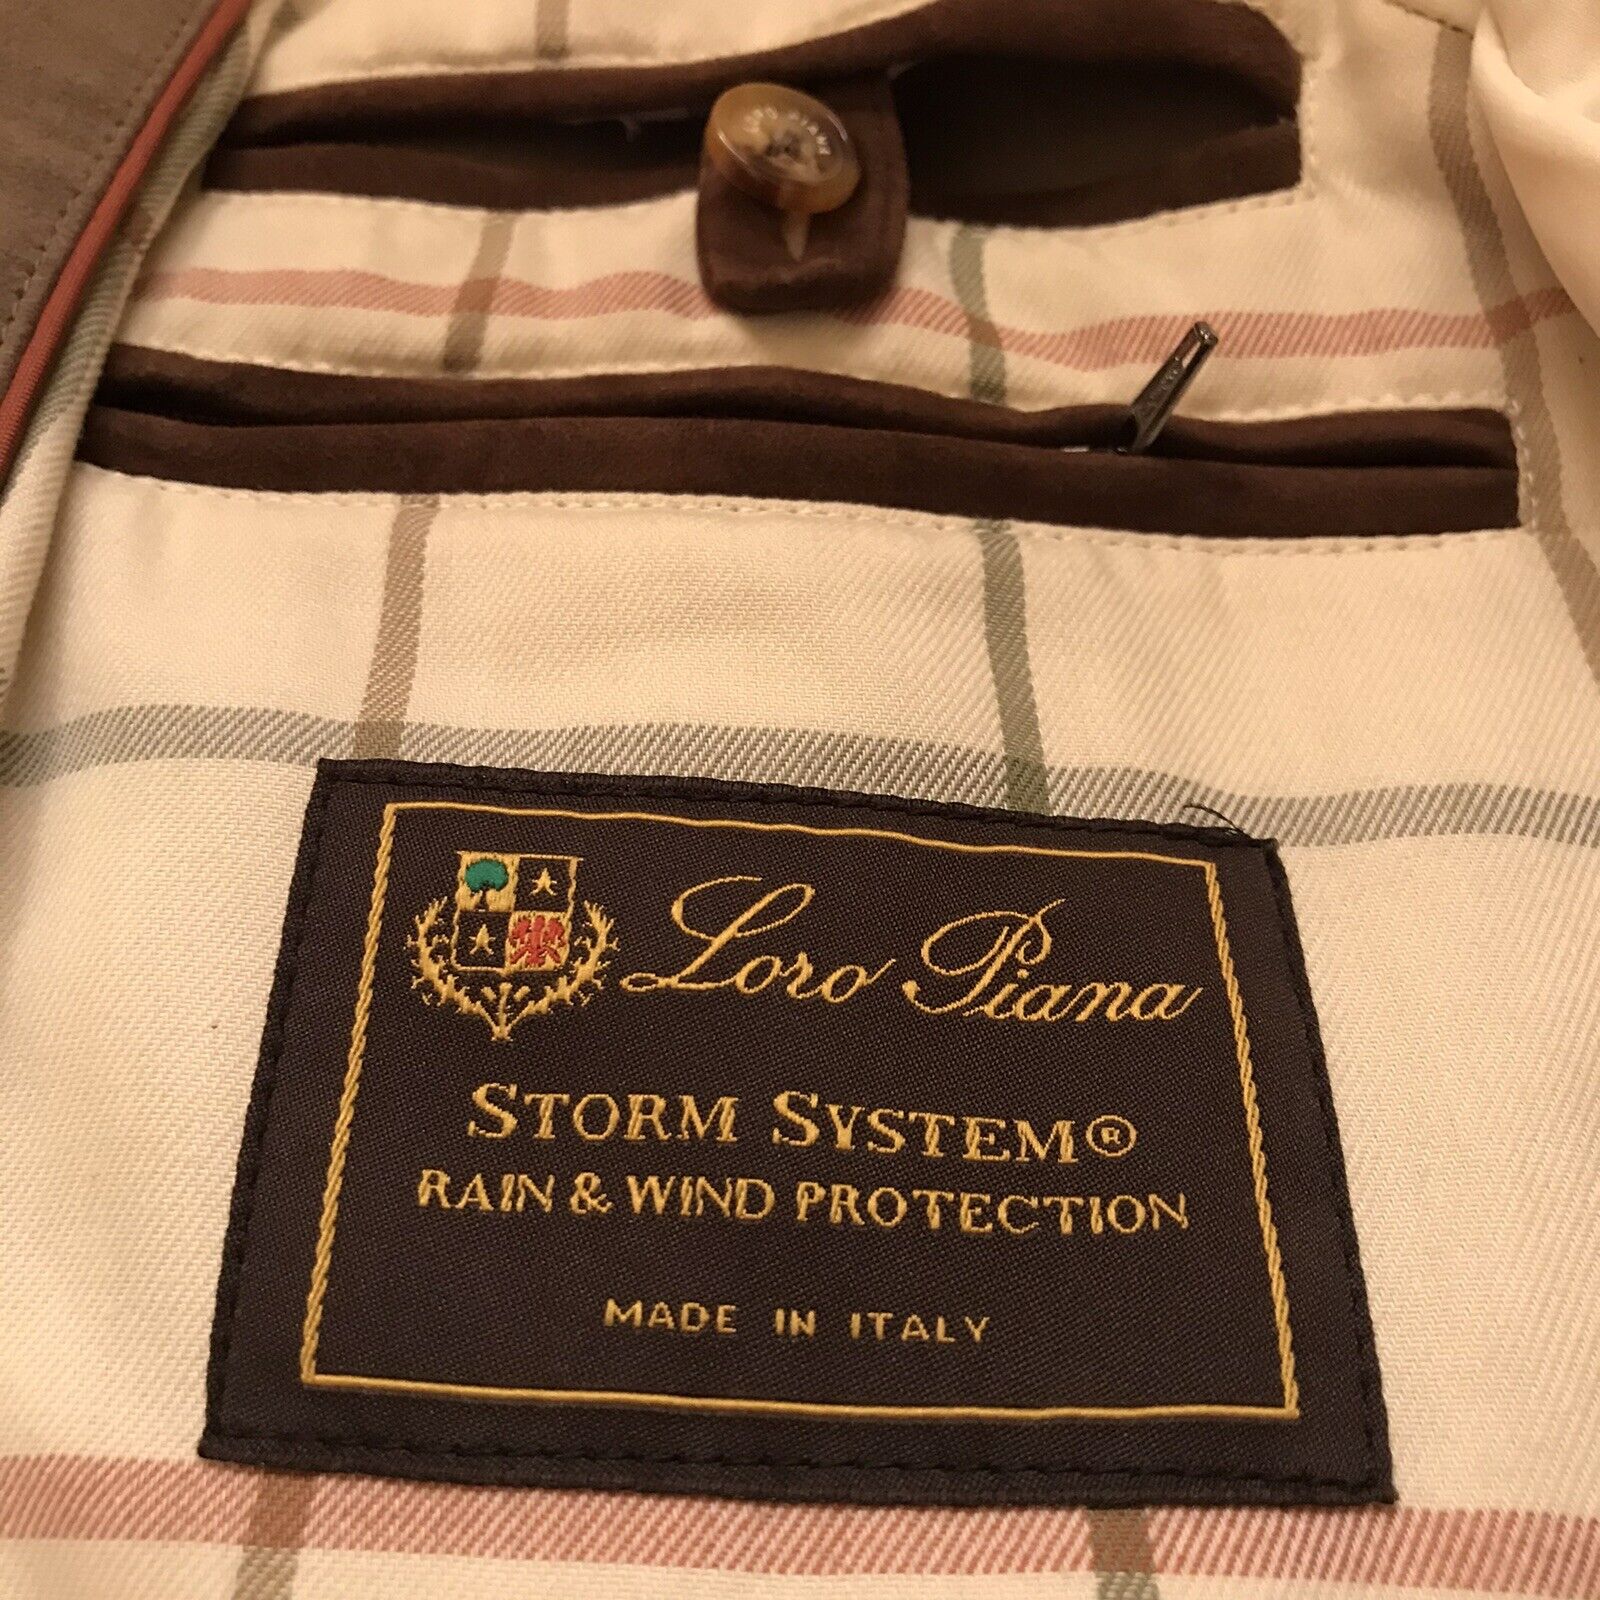 Loro Piana Storm System Coat winter jacket italy cotton lined Men's brown  Size S